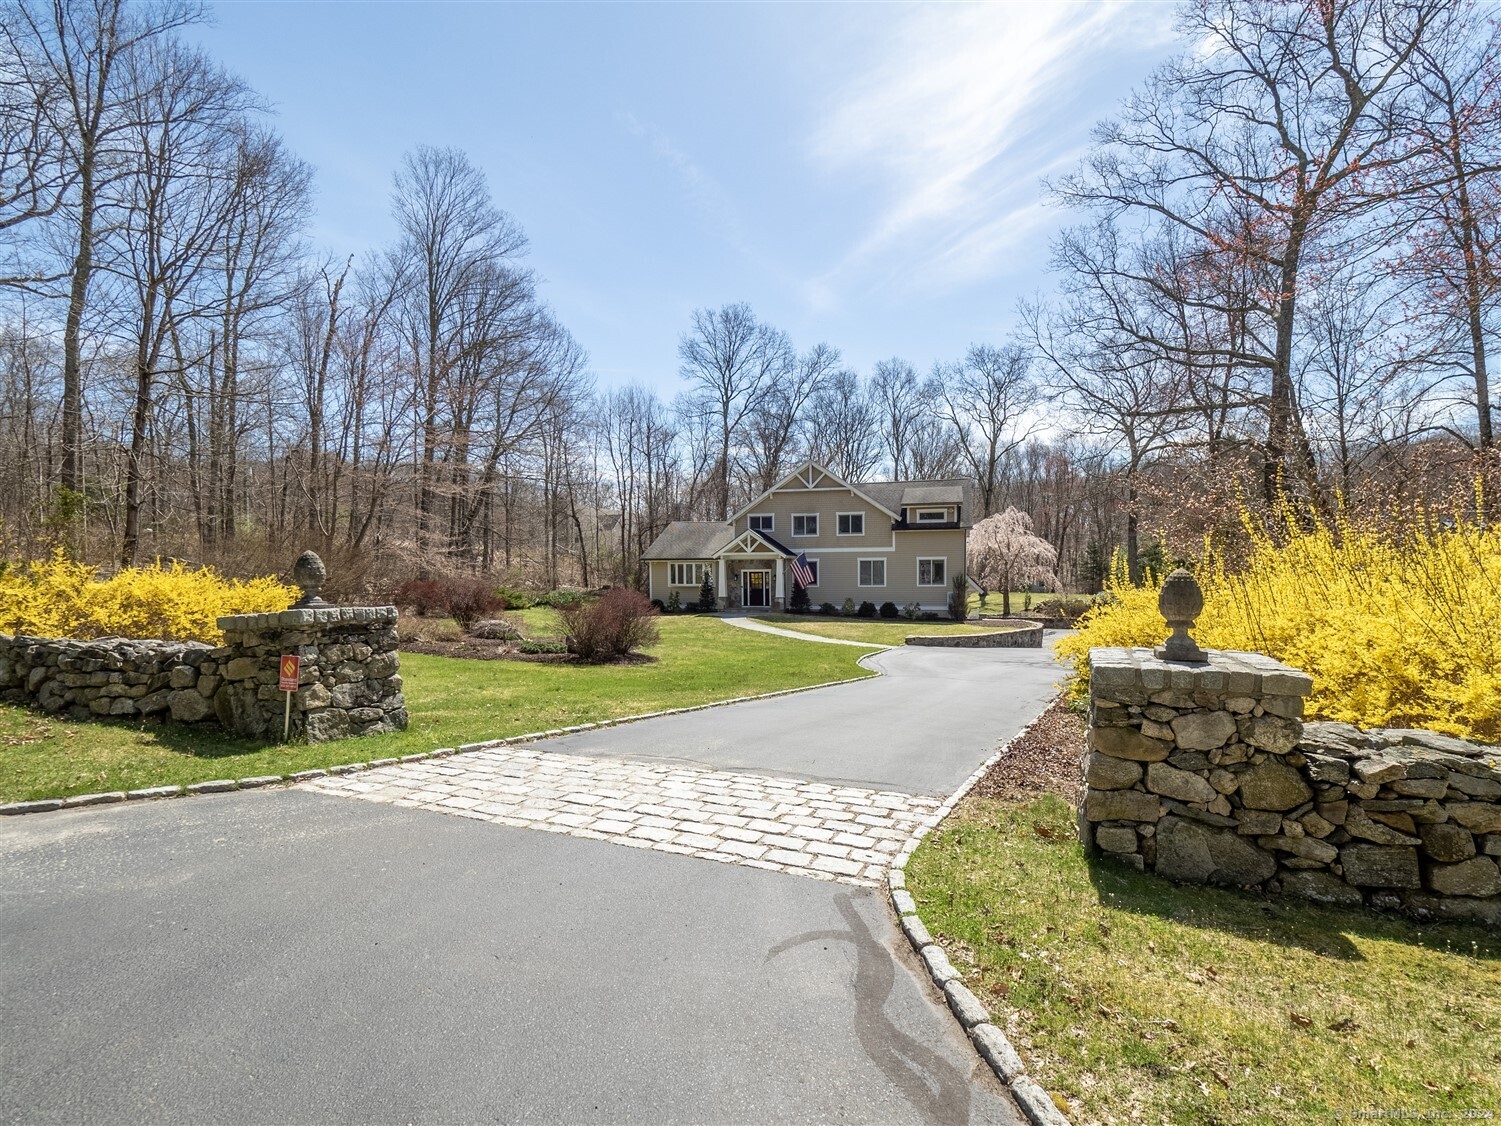 WELCOME TO 99 TWIN OAK LANE! Conveniently located in South Wilton.